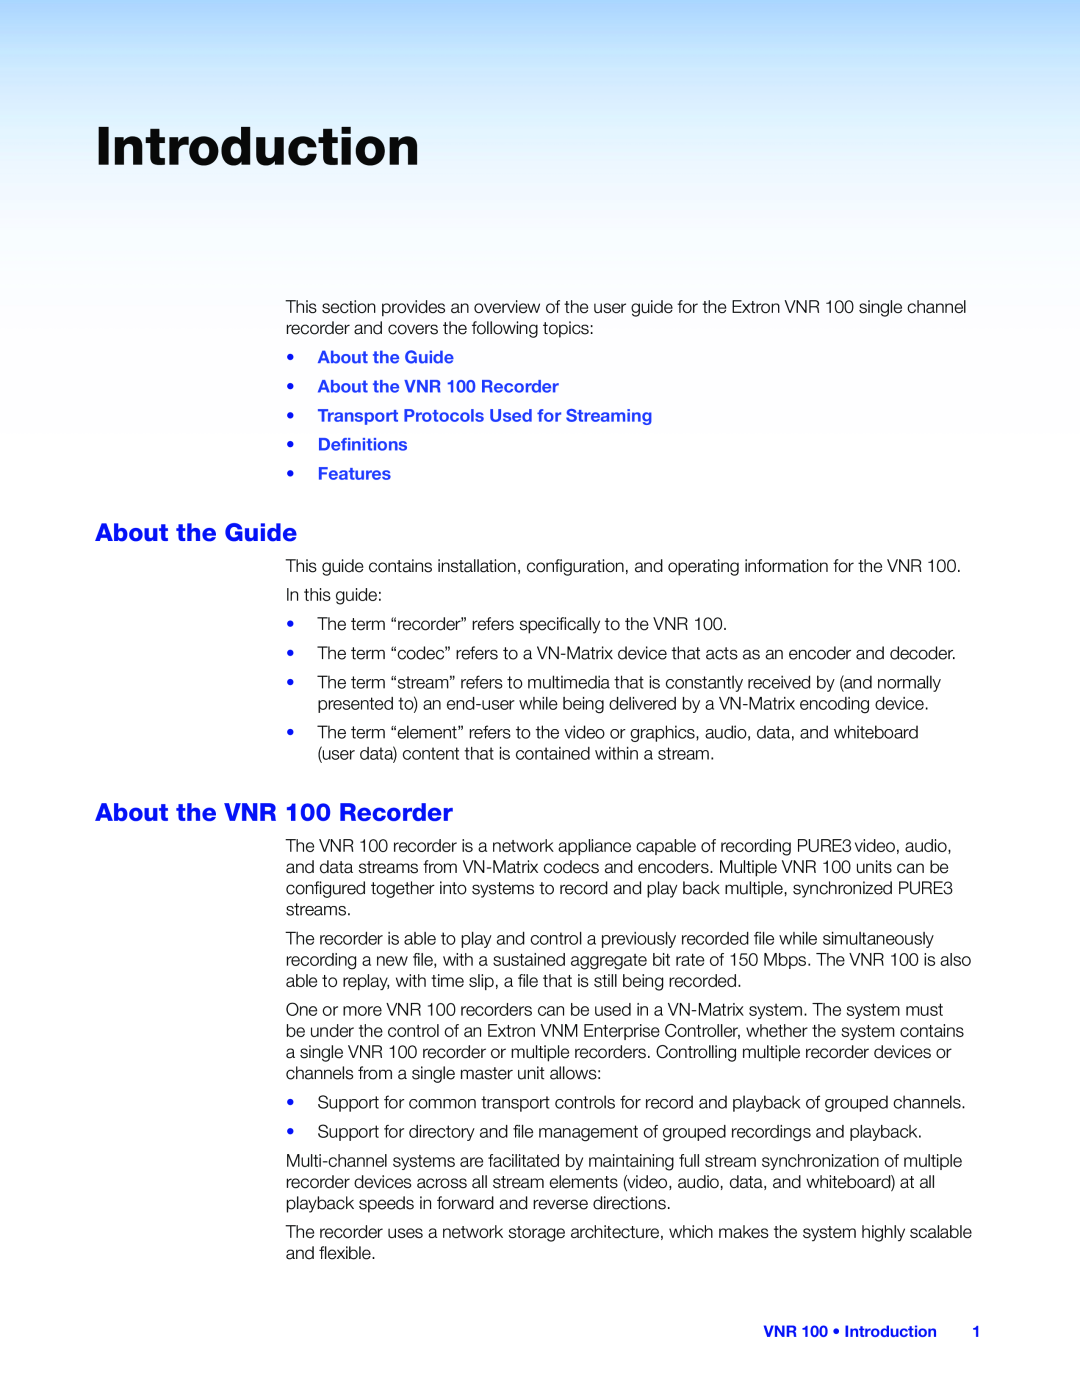 Extron electronic manual Introduction, About the Guide About the VNR 100 Recorder, Definitions Features 